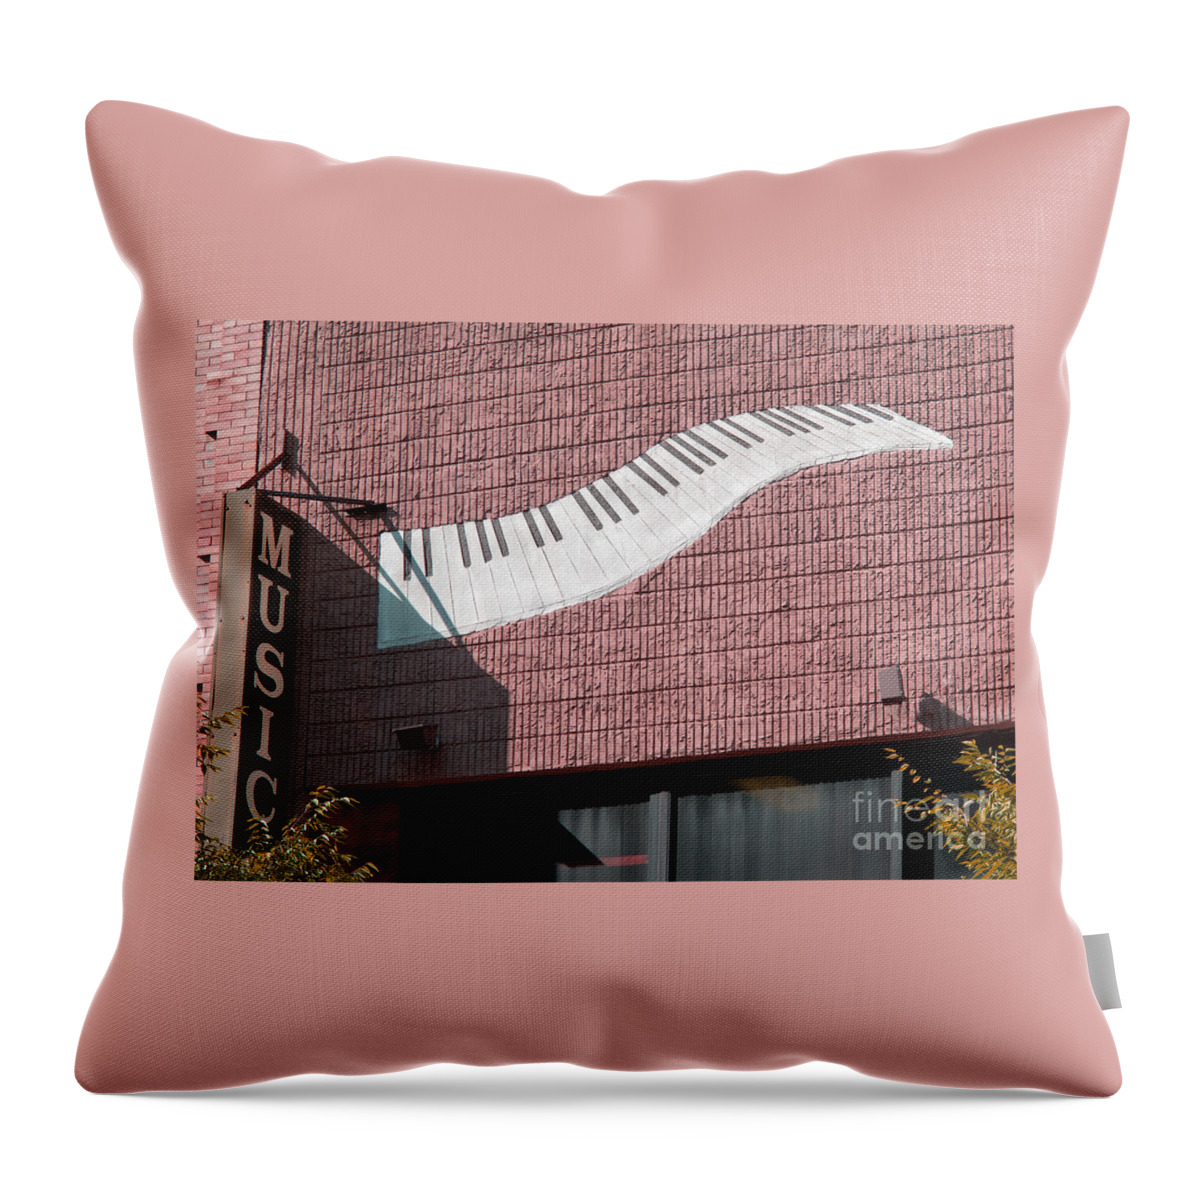 Sign Throw Pillow featuring the photograph Keyboard Music by Ann Horn